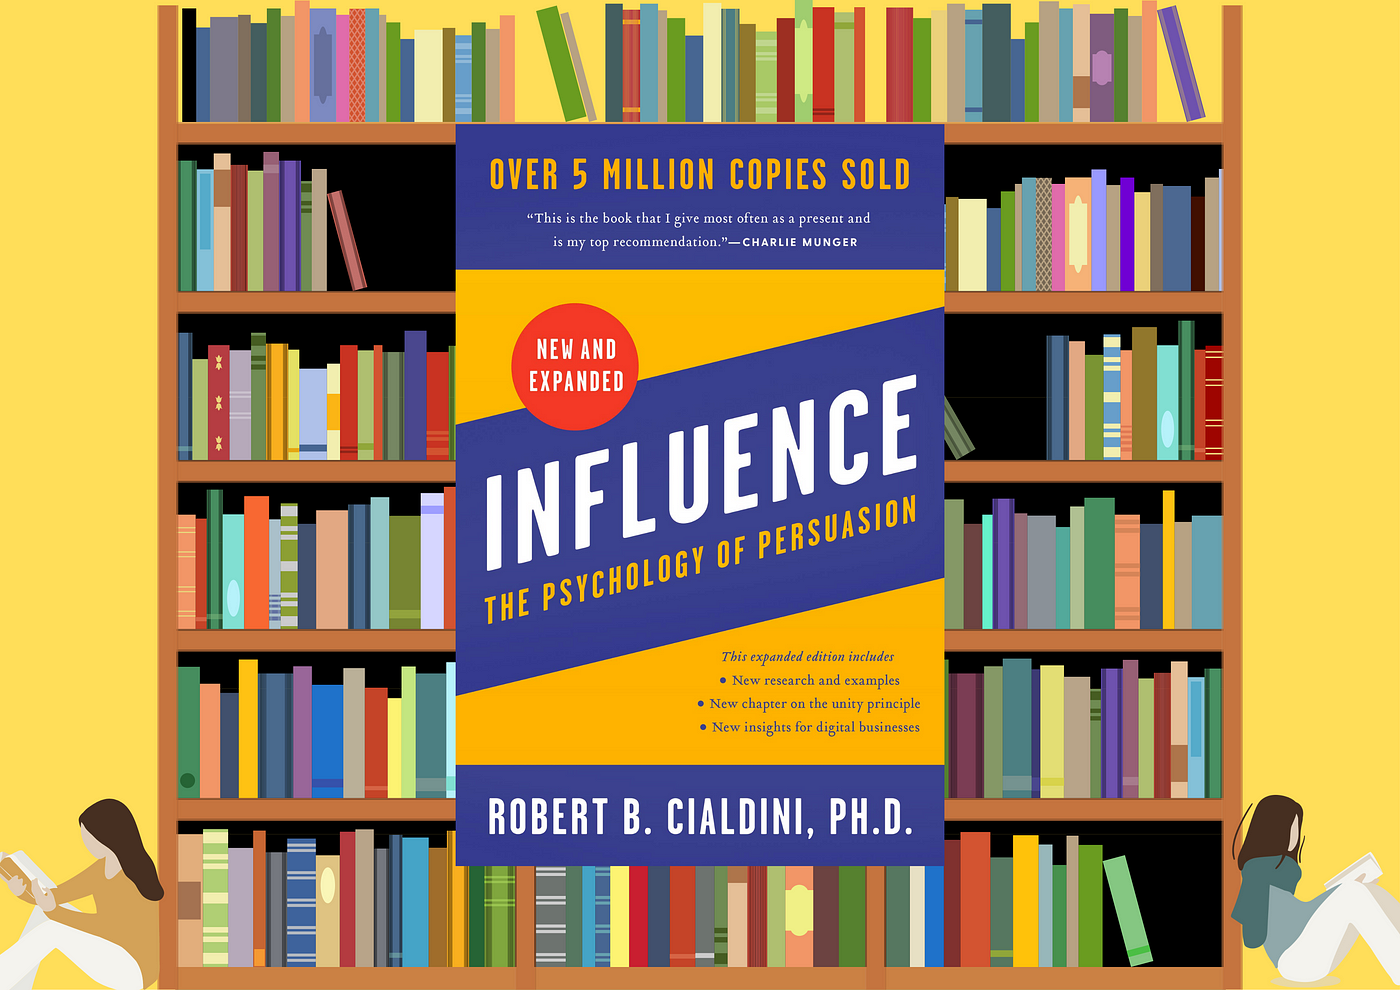 Weapons Of Influence: The 7 Principles of Persuasion, by Jason Vu Nguyen